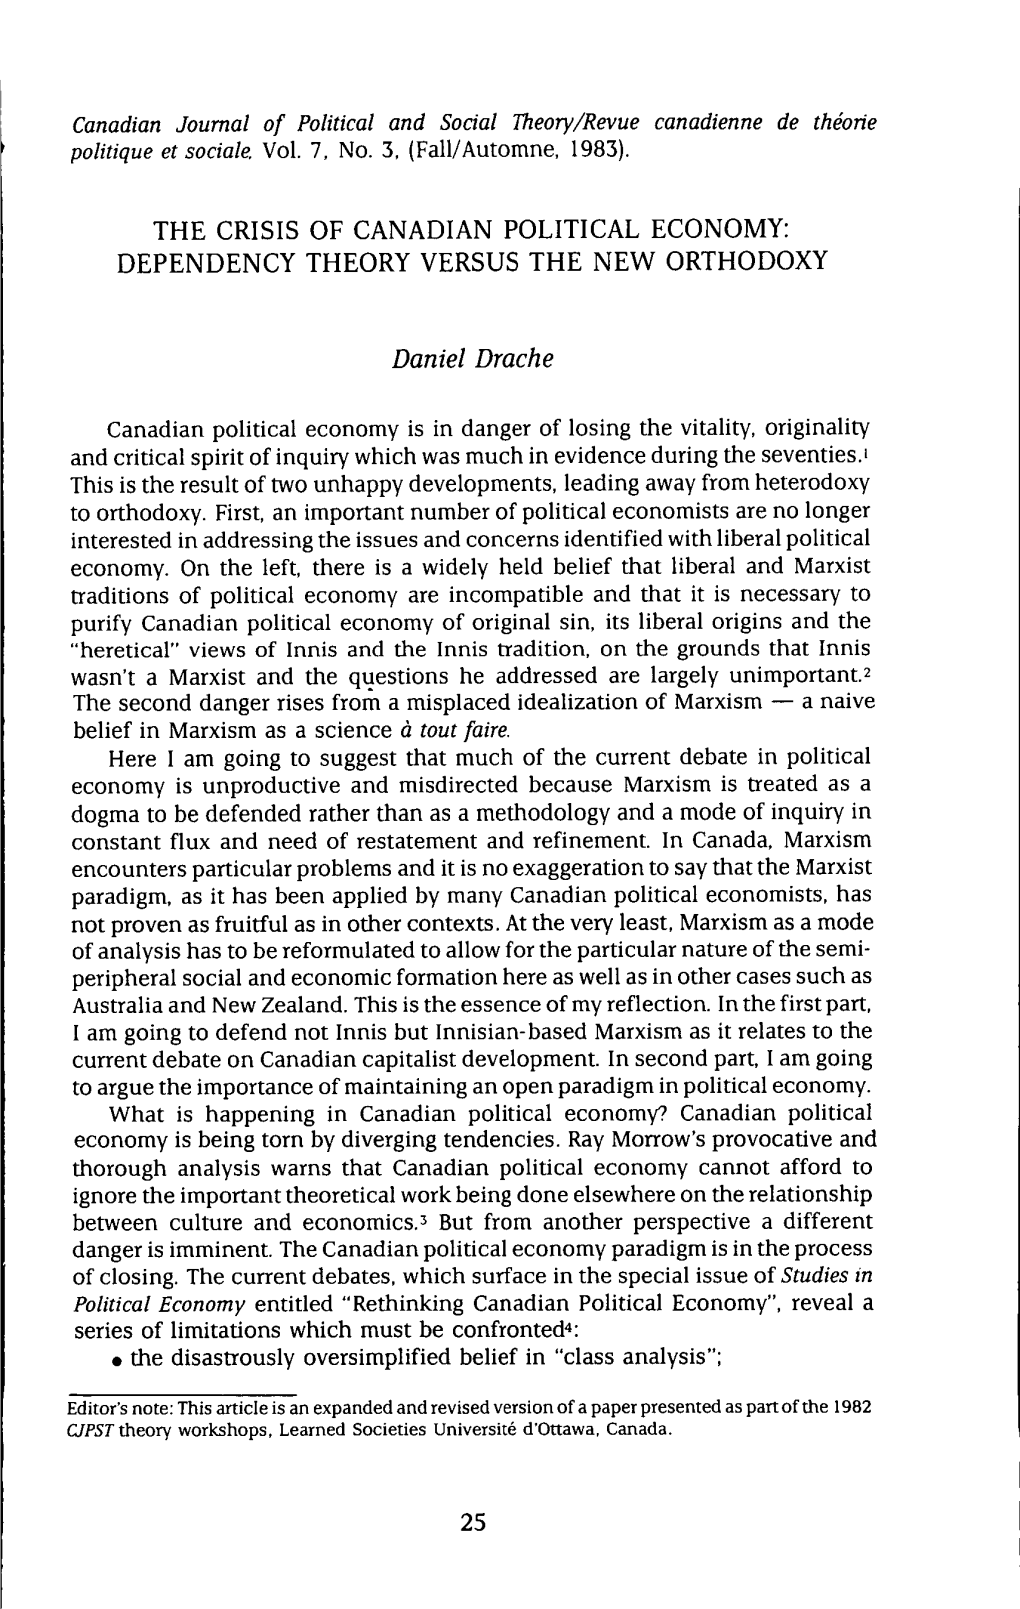 DEPENDENCY THEORY VERSUS the NEW ORTHODOXY Daniel Drache Canadian Political Economy Is